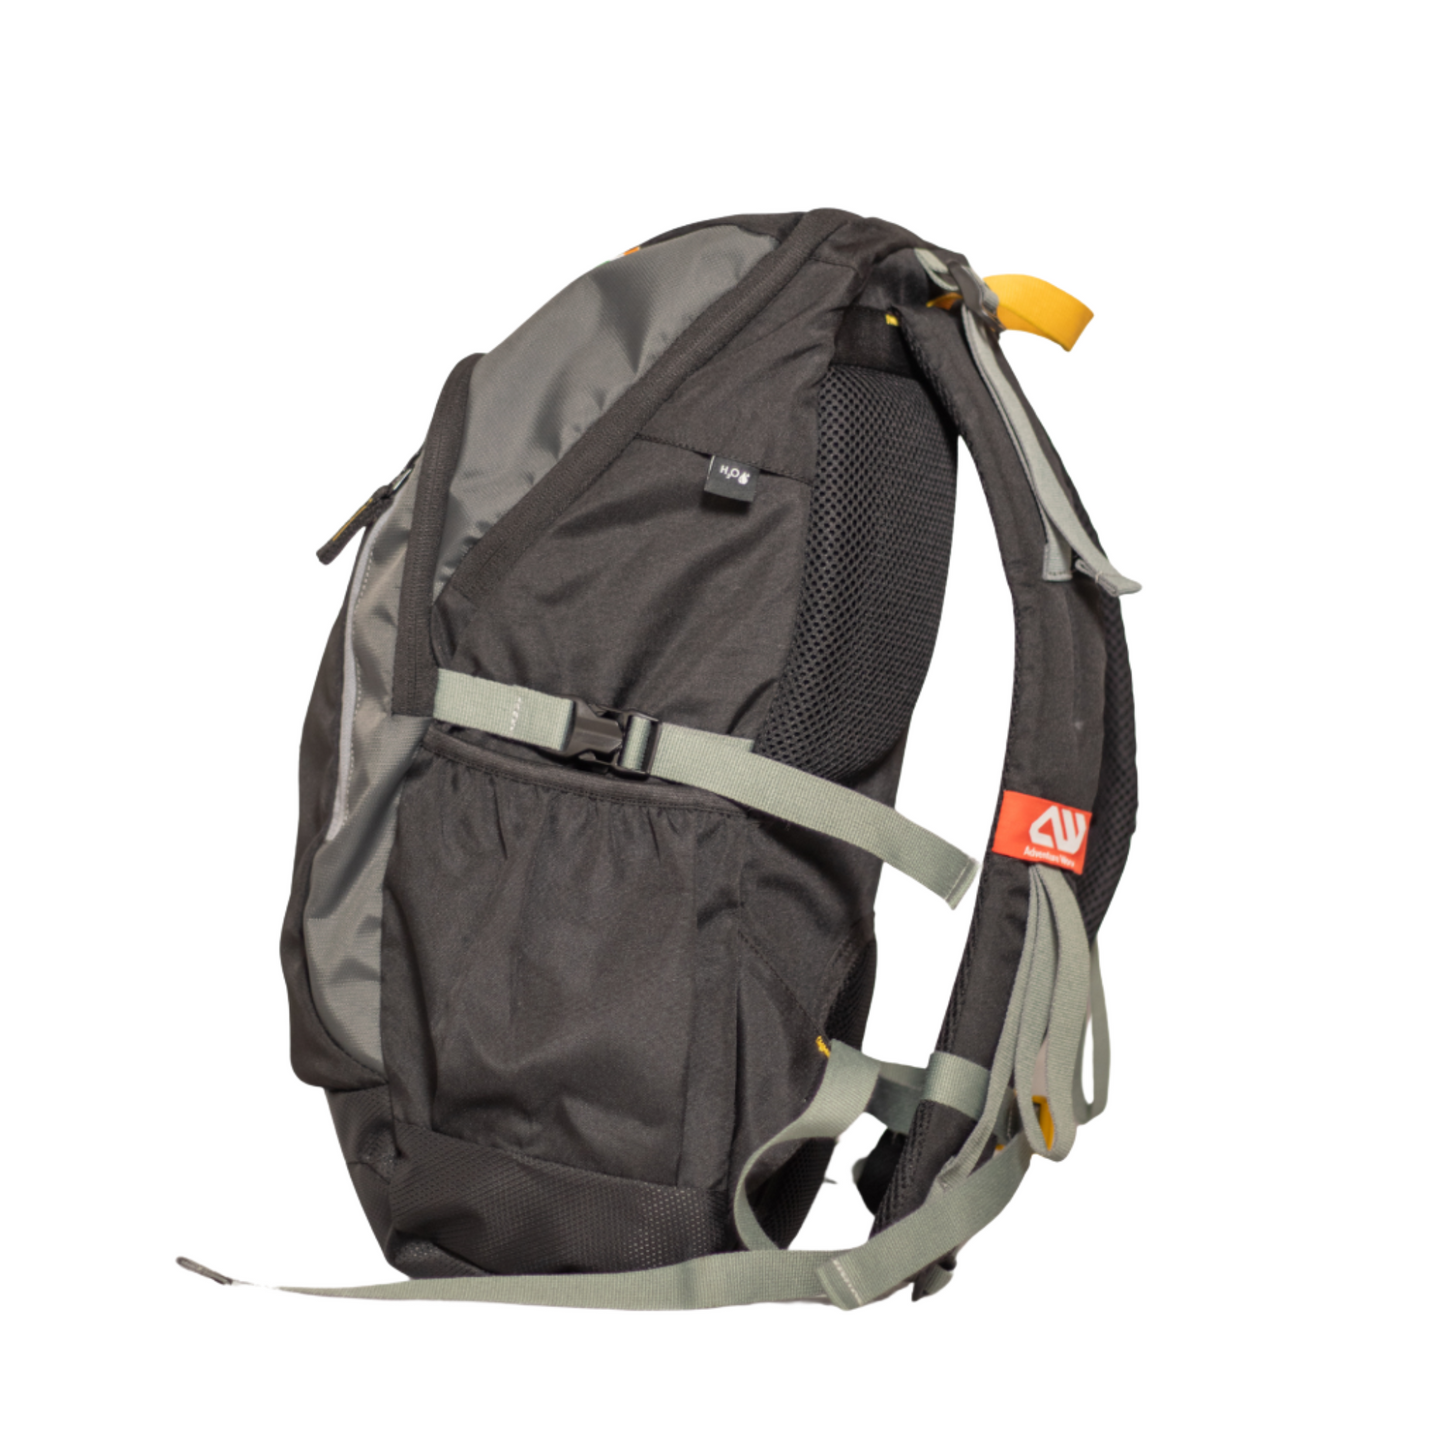 30L Trekking Backpack: Ideal for daily use and short treks